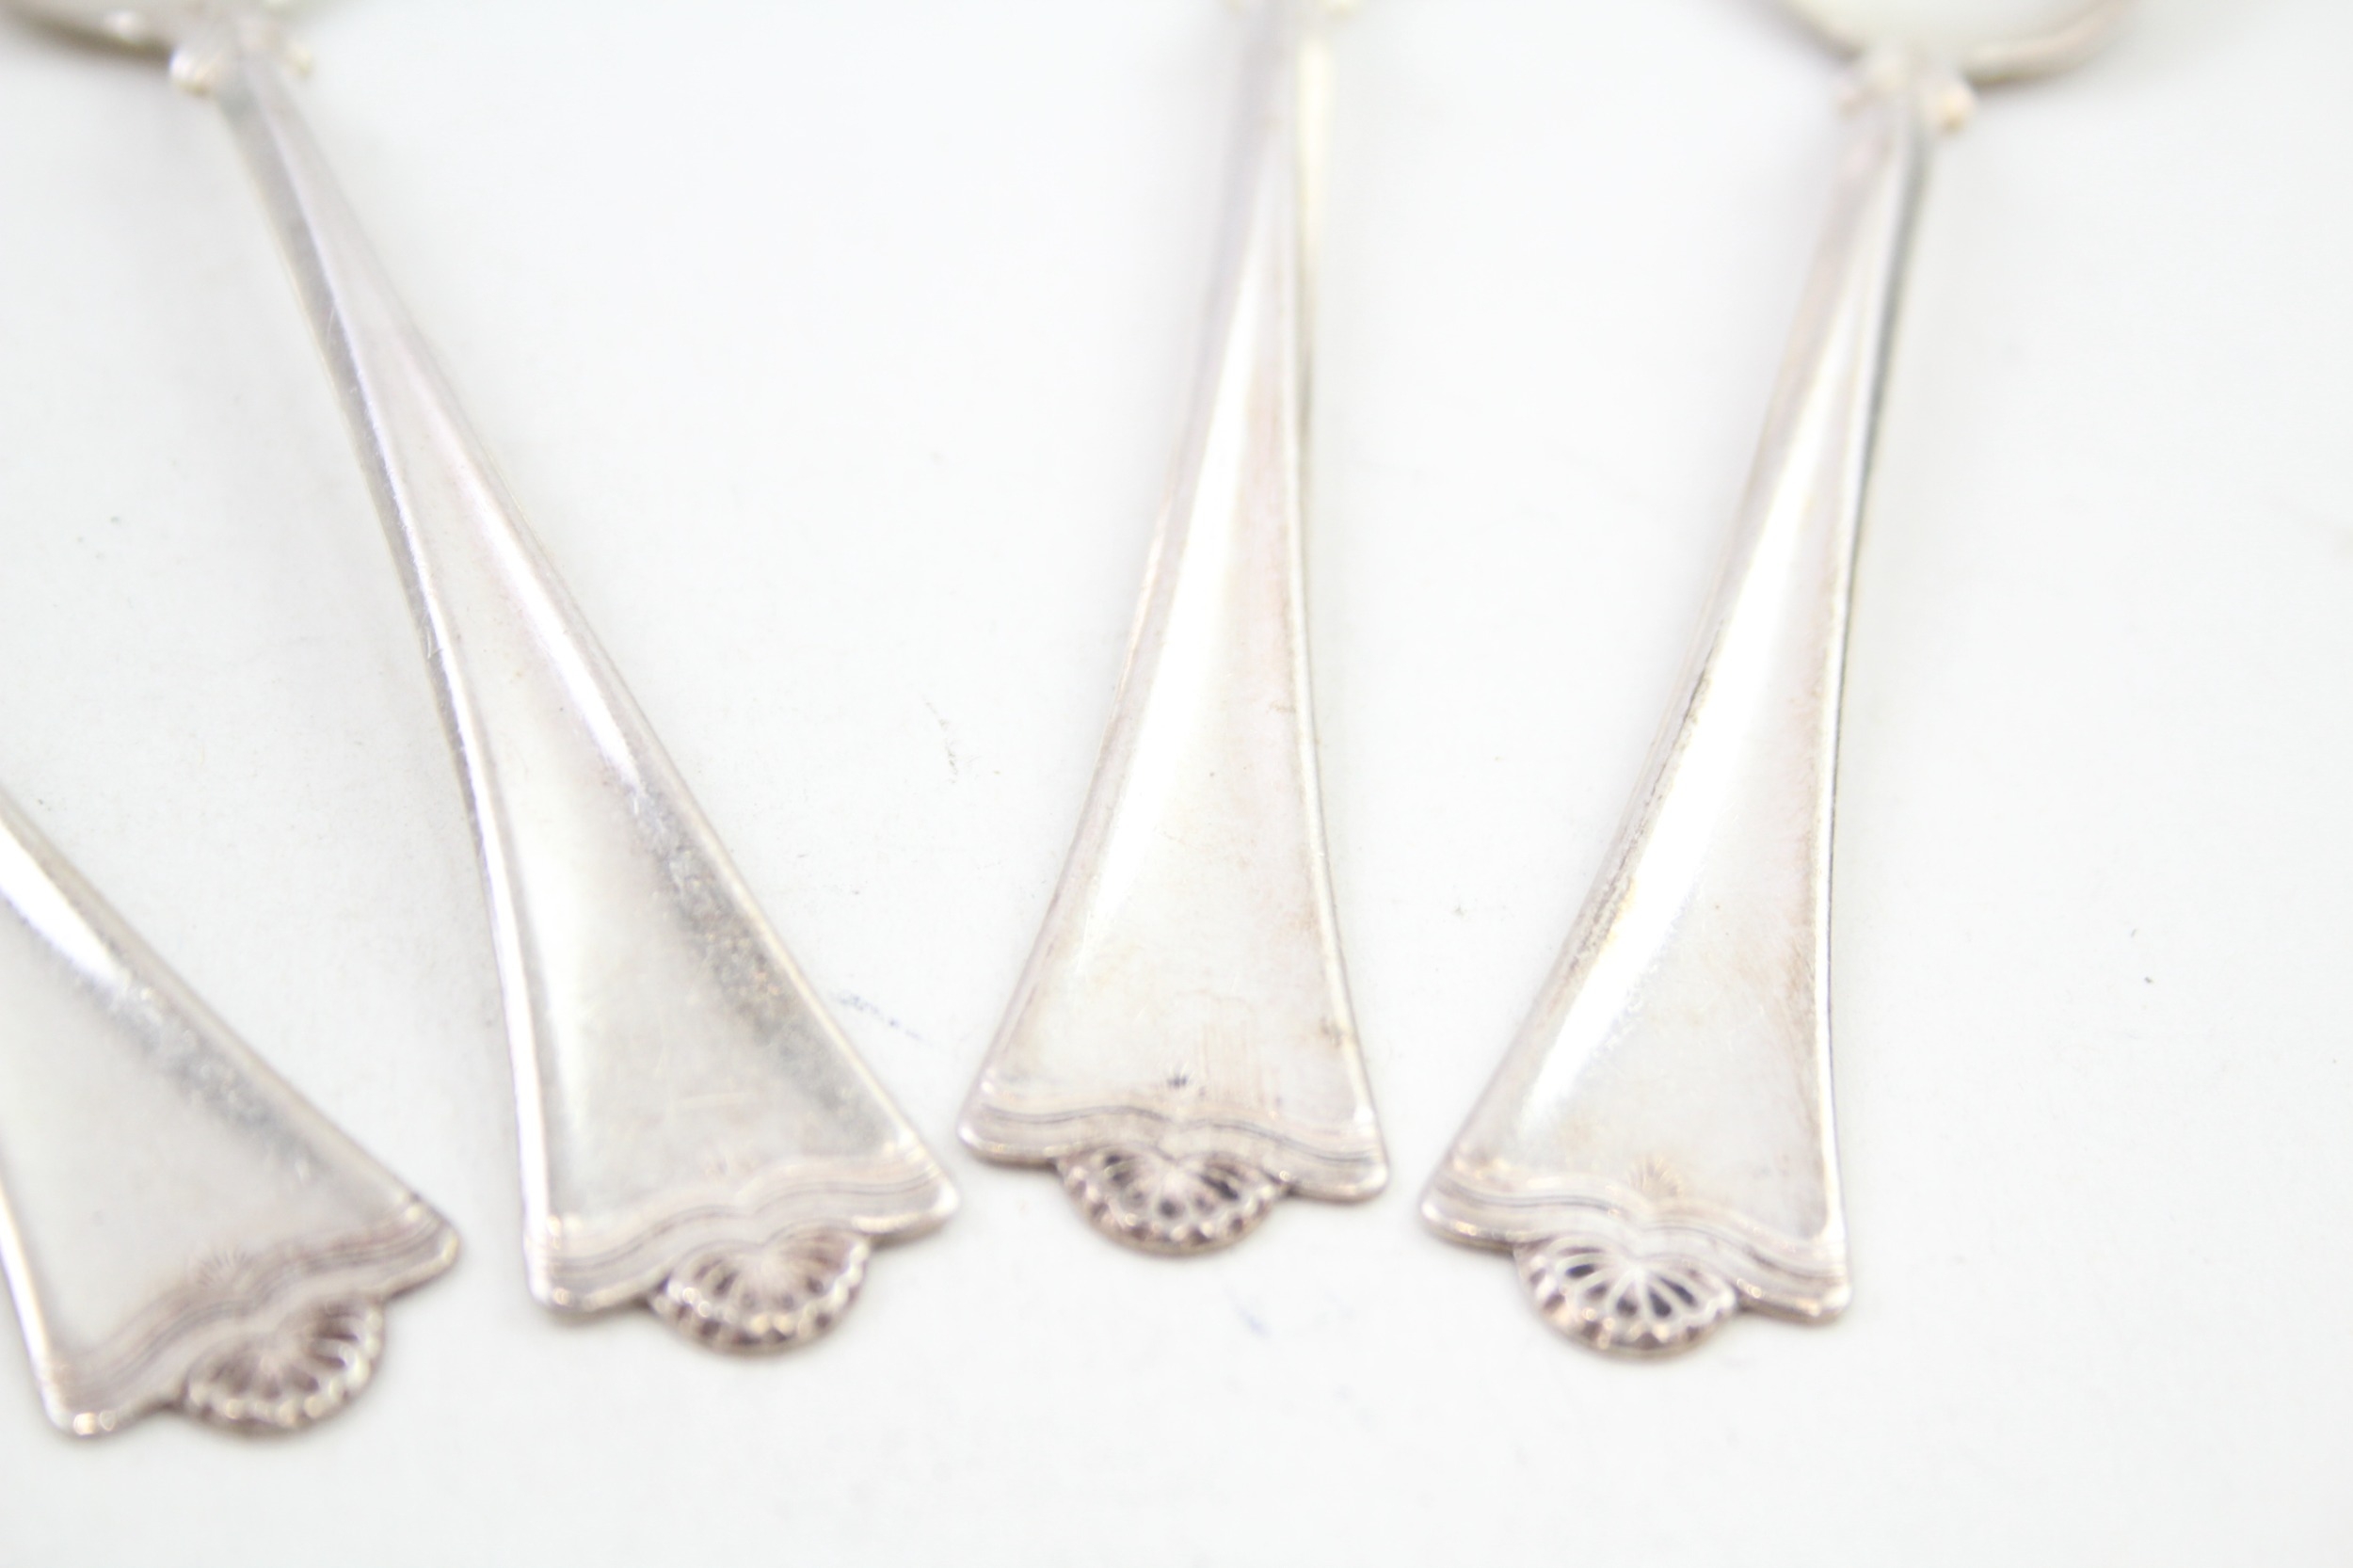 5 x .830 norway silver teaspoons maker marked NW - Image 5 of 6